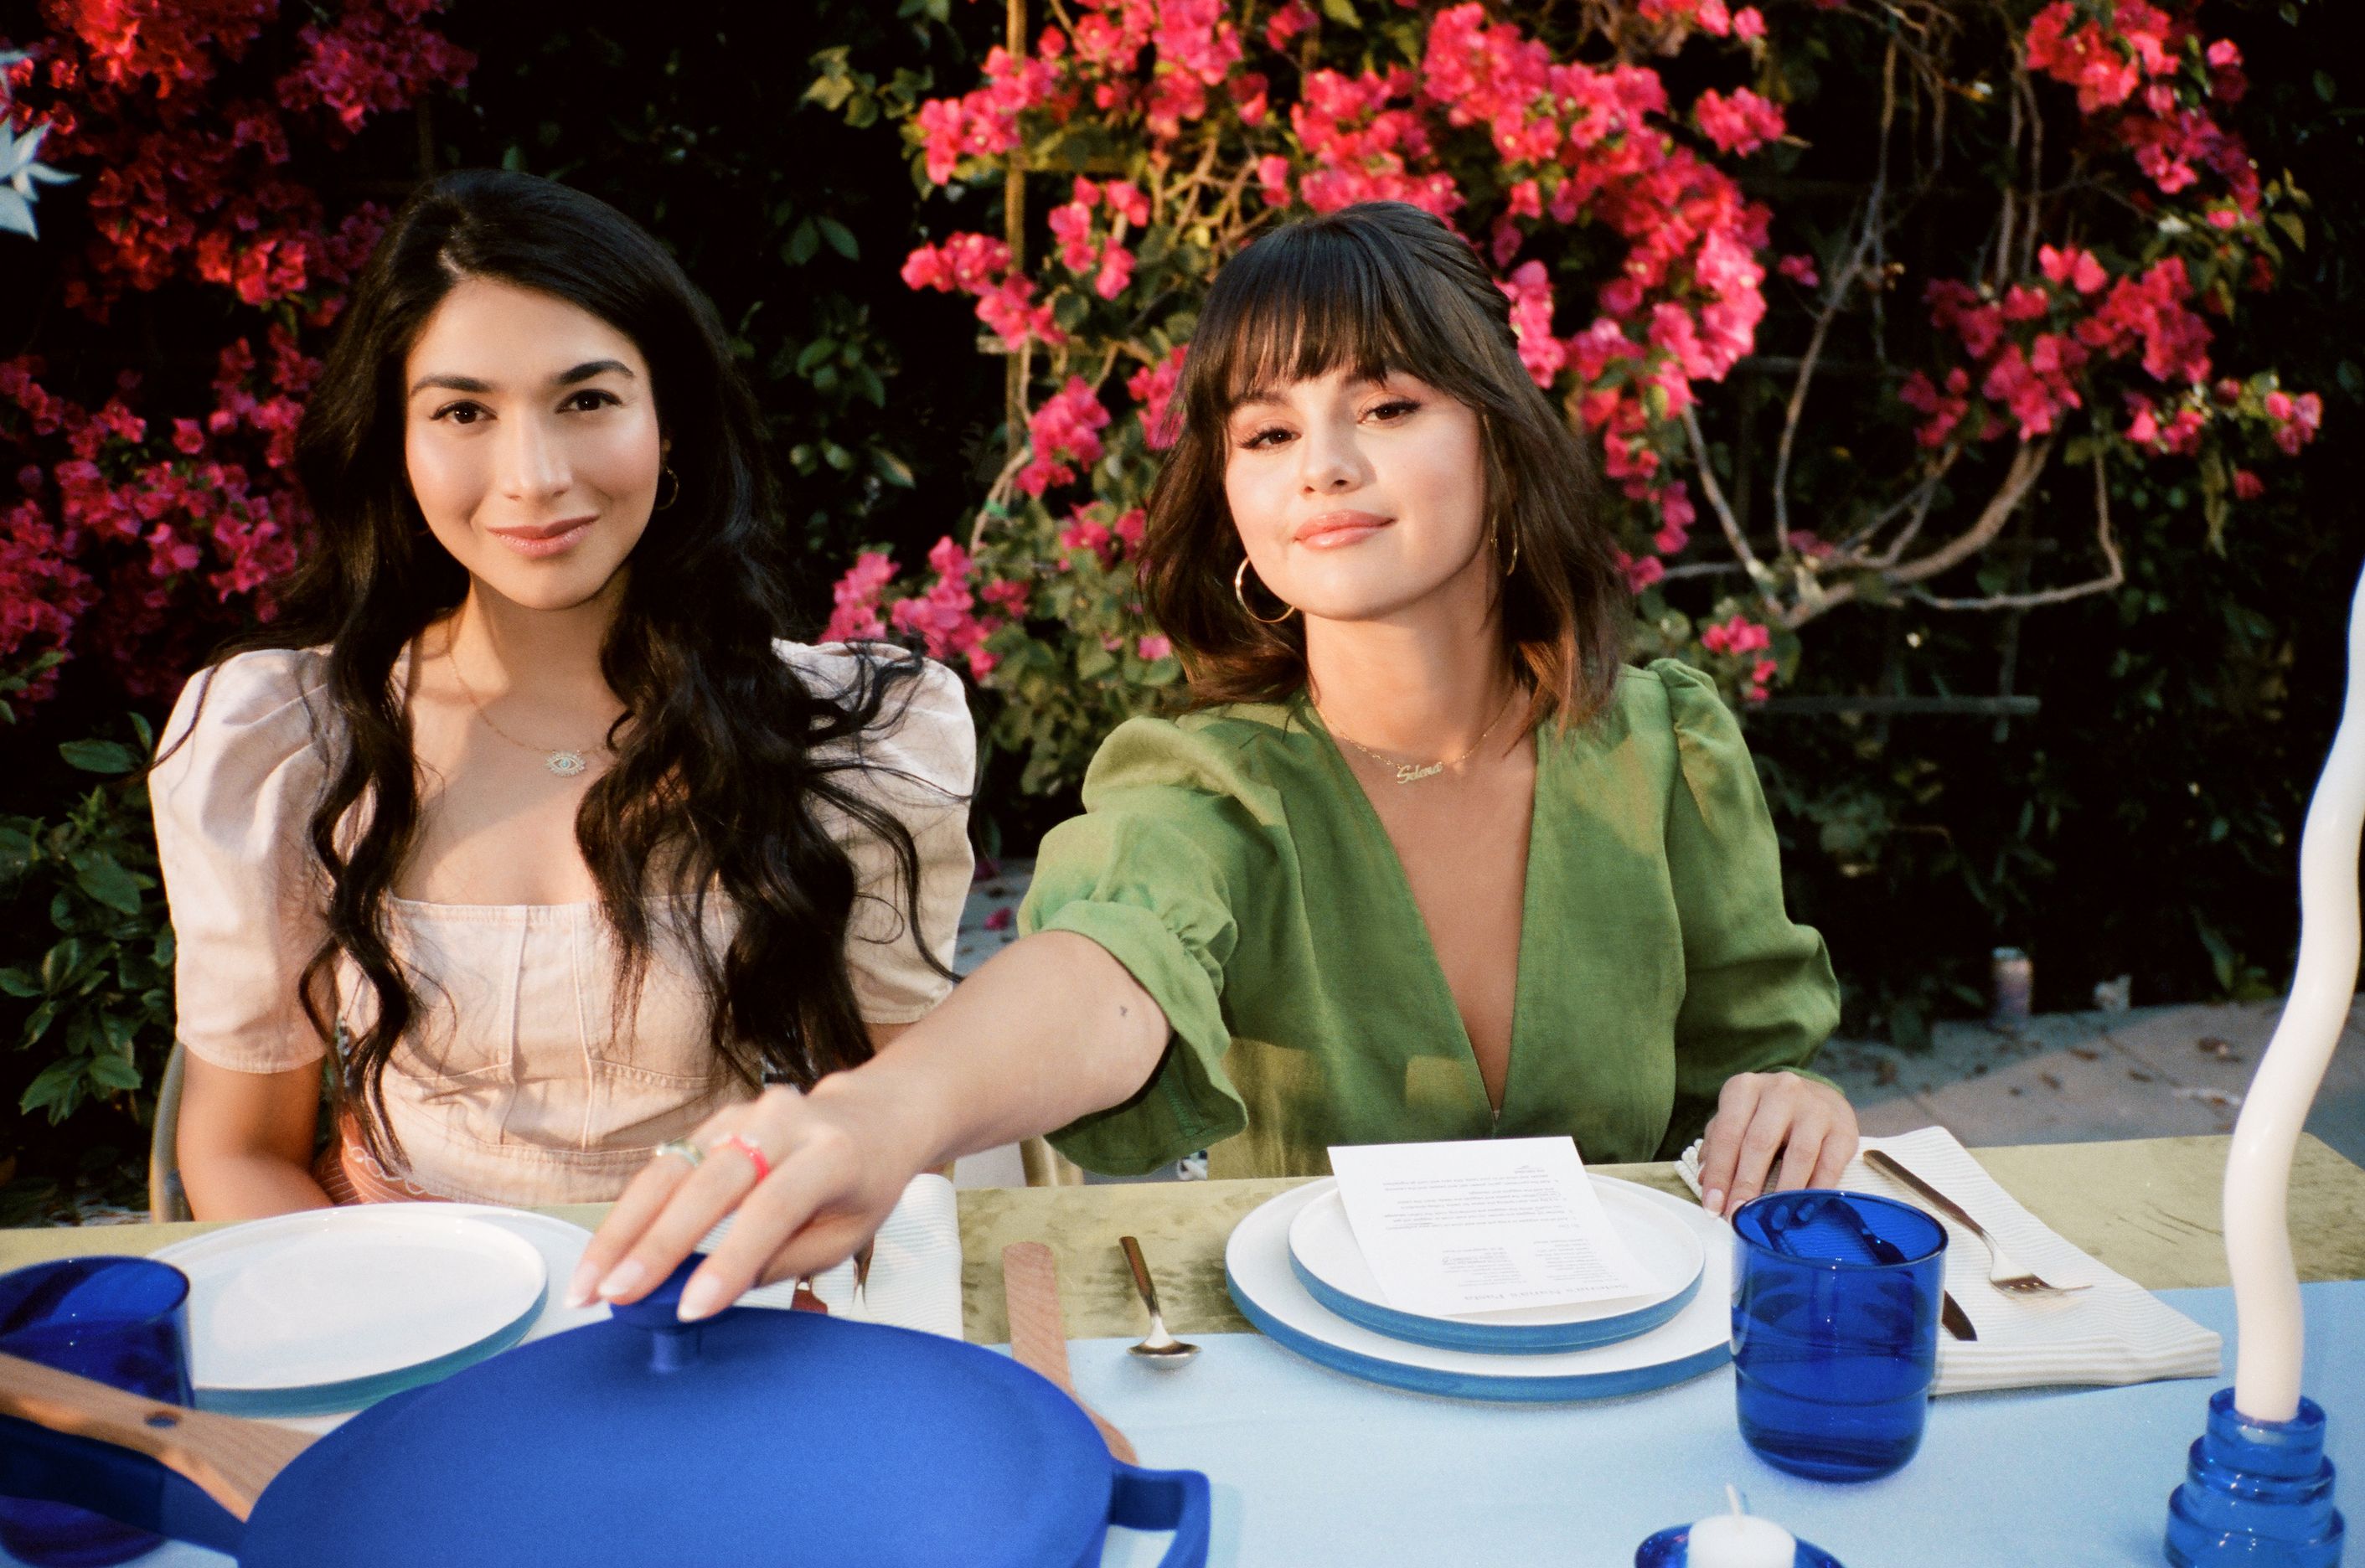 Selena Gomez partners with Our Place on new cookware